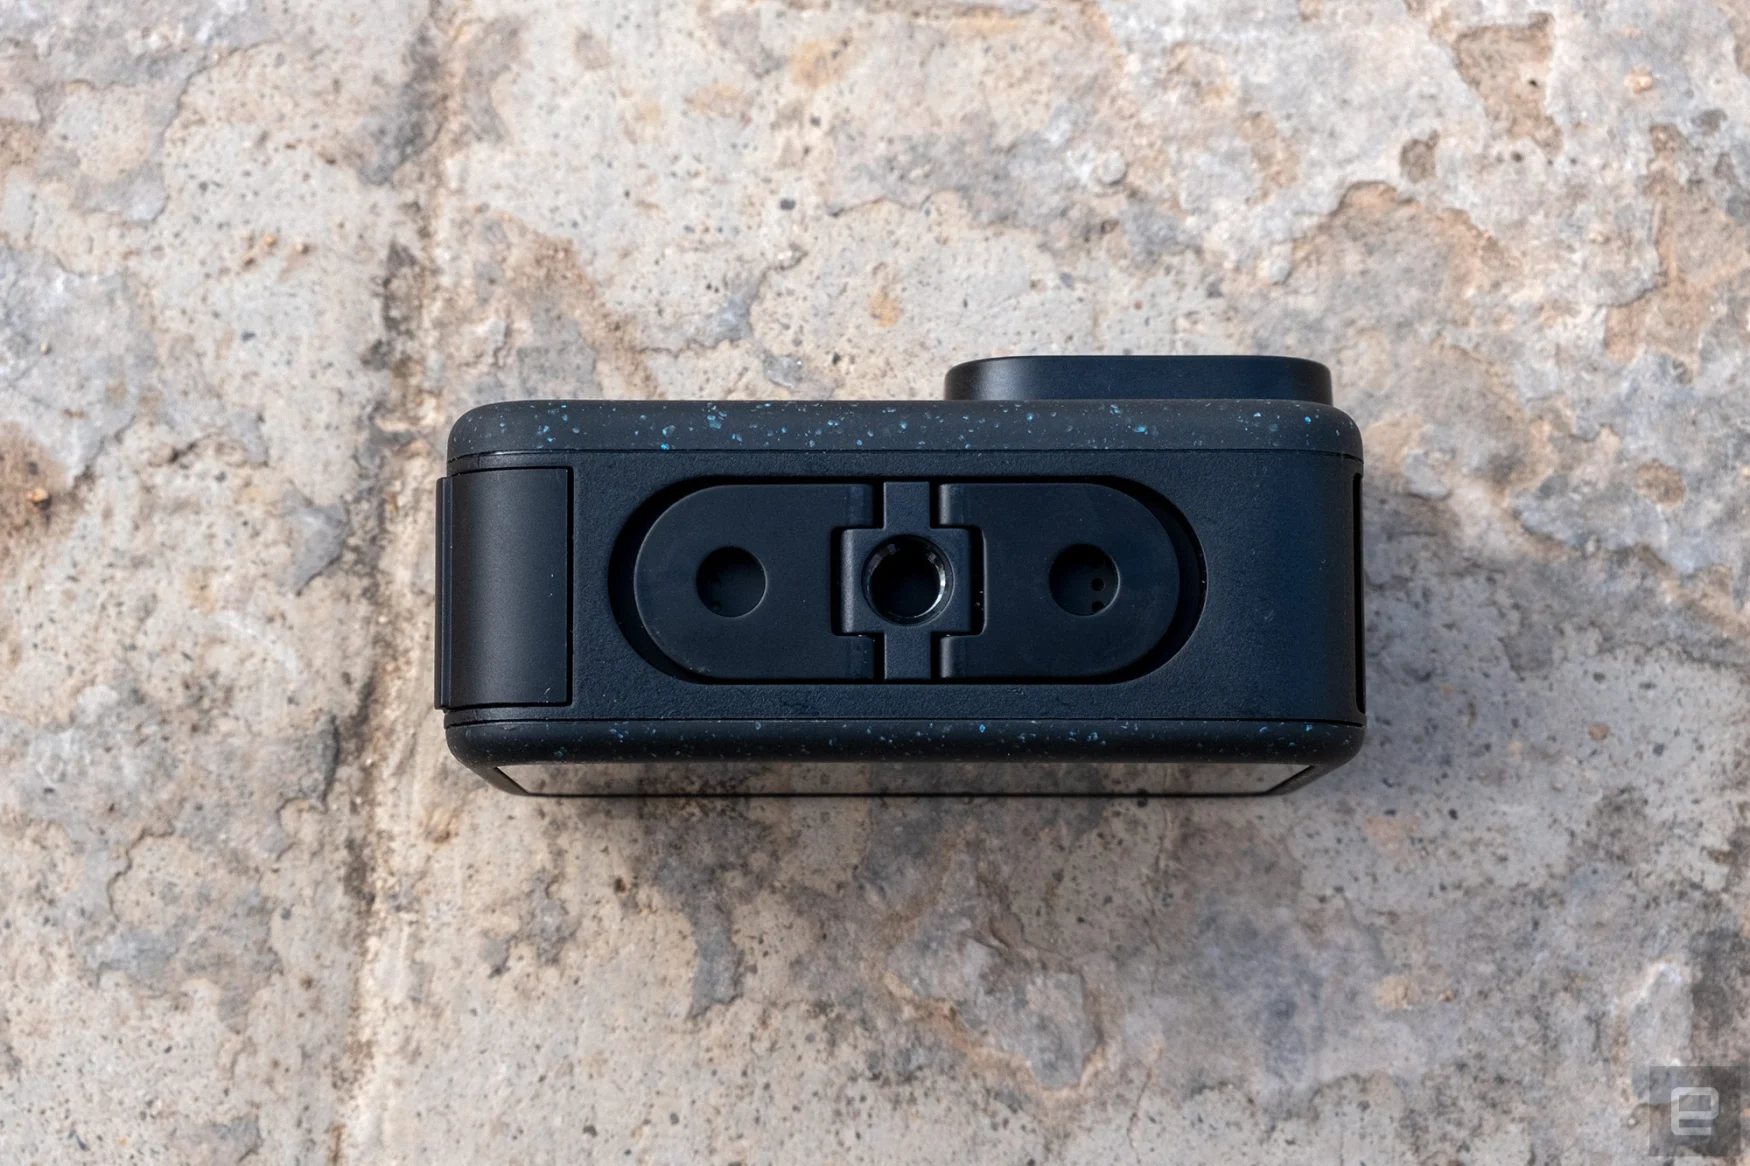 The underside of the new GoPro Hero 12 Black shows the new built-in  tripod mount.